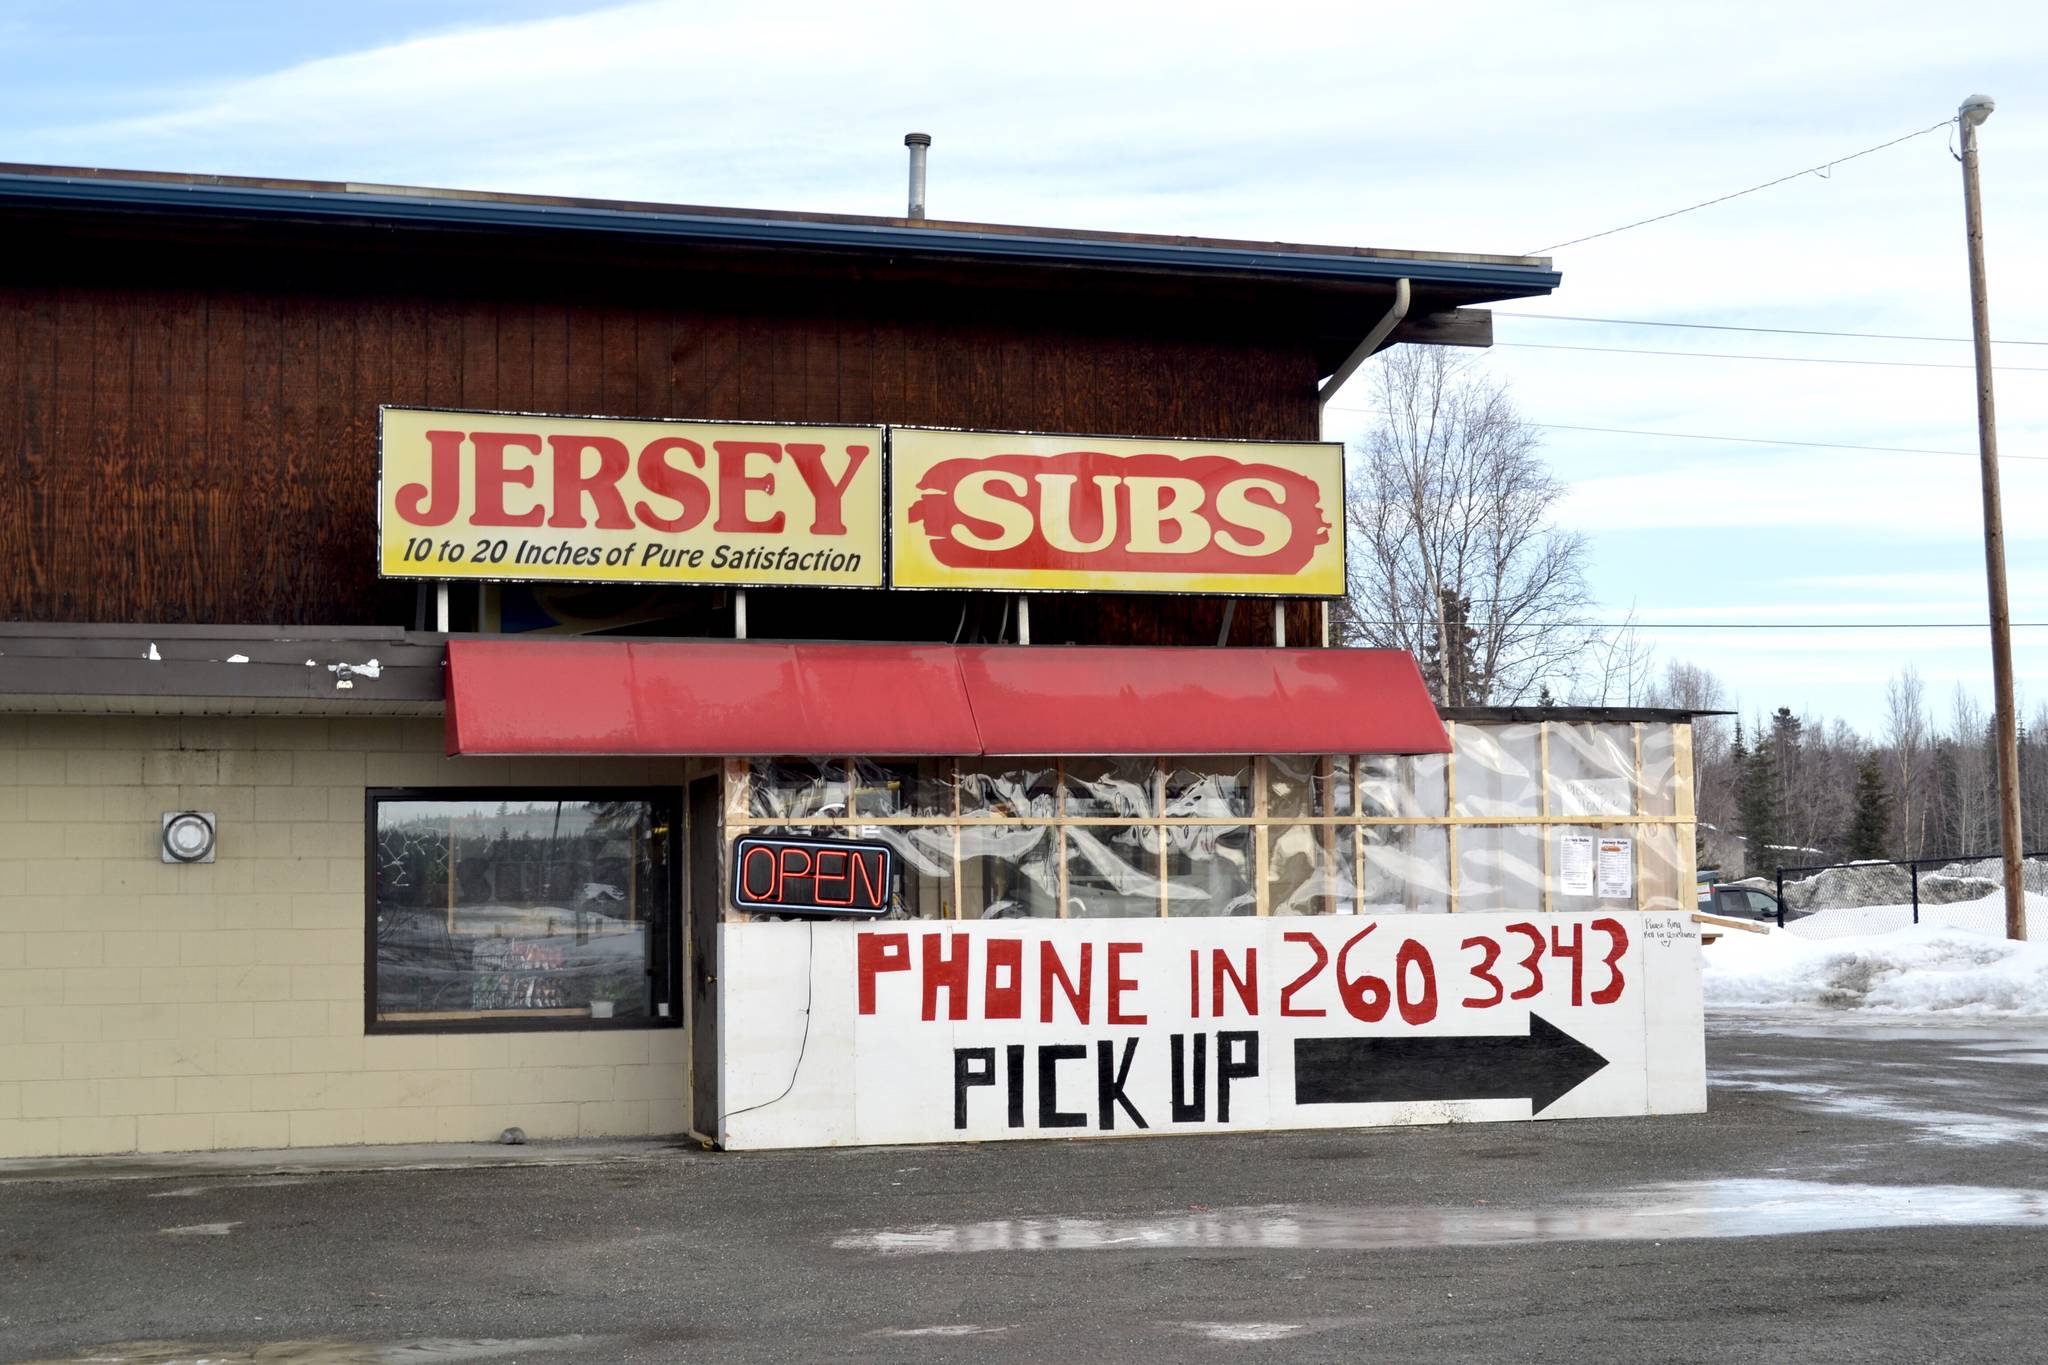 A sign advertising pickup orders can be seen at Kenai sandwich Jersey Subs on Thursday, March 26, 2020. Under new state mandates aiming to prevent the spread of the coronavirus local eateries can only provide takeout services. Under legislation recently passed by the U.S. Senate, small businesses with fewer than 500 employees that have federally guaranteed loans and who keep up their payroll also can get up to eight weeks of payments. (Victoria Petersen/Peninsula Clarion)